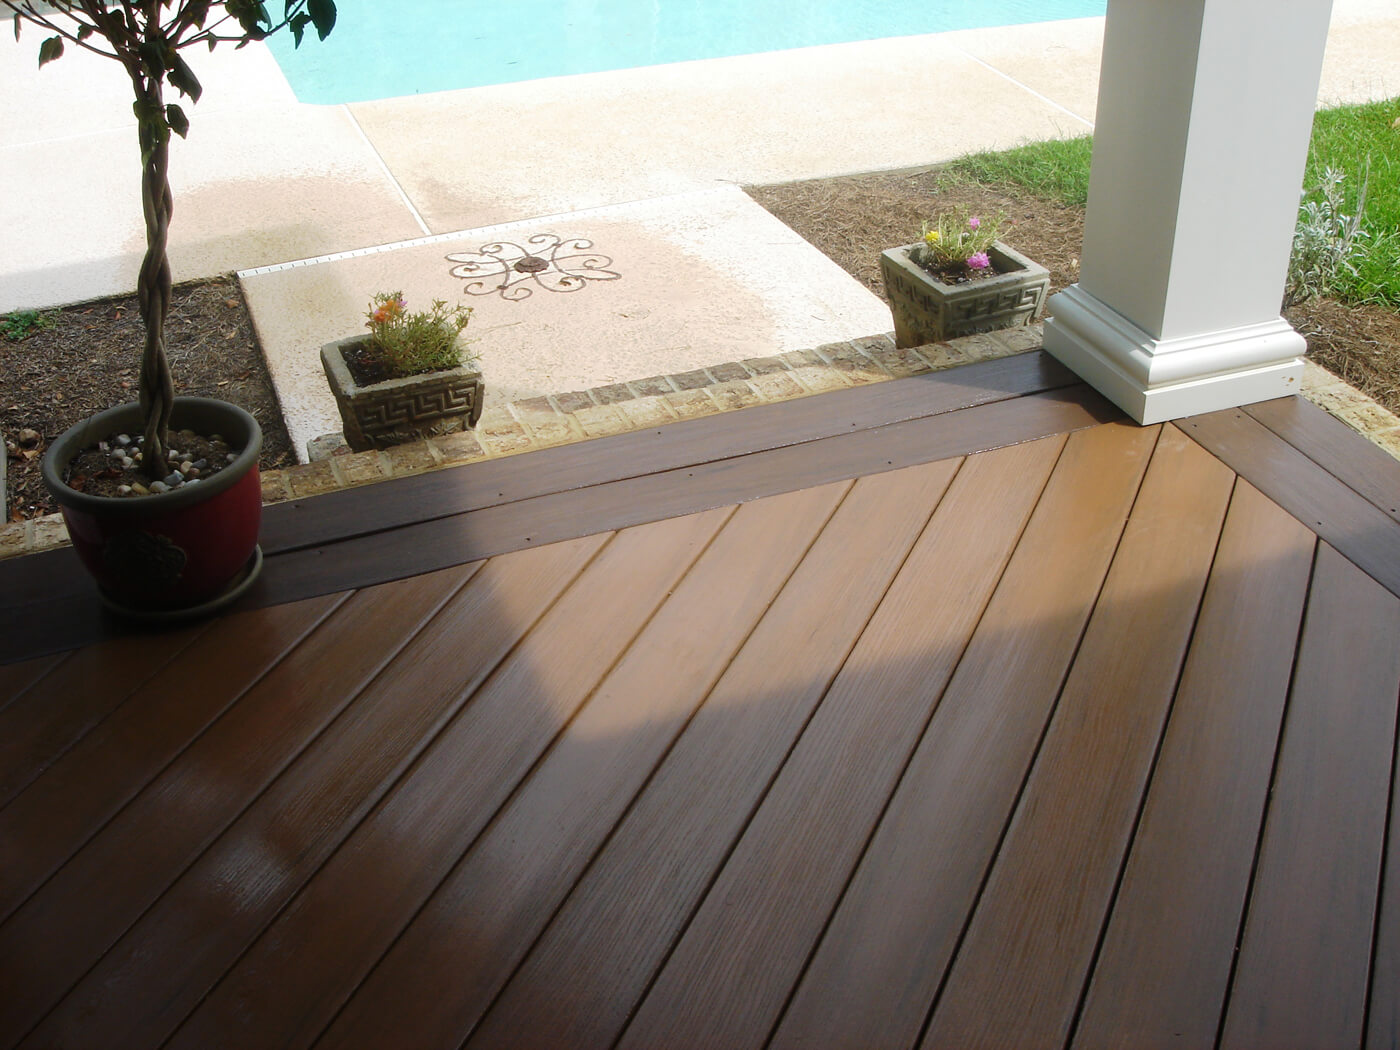 Wood deck detail and potted plants